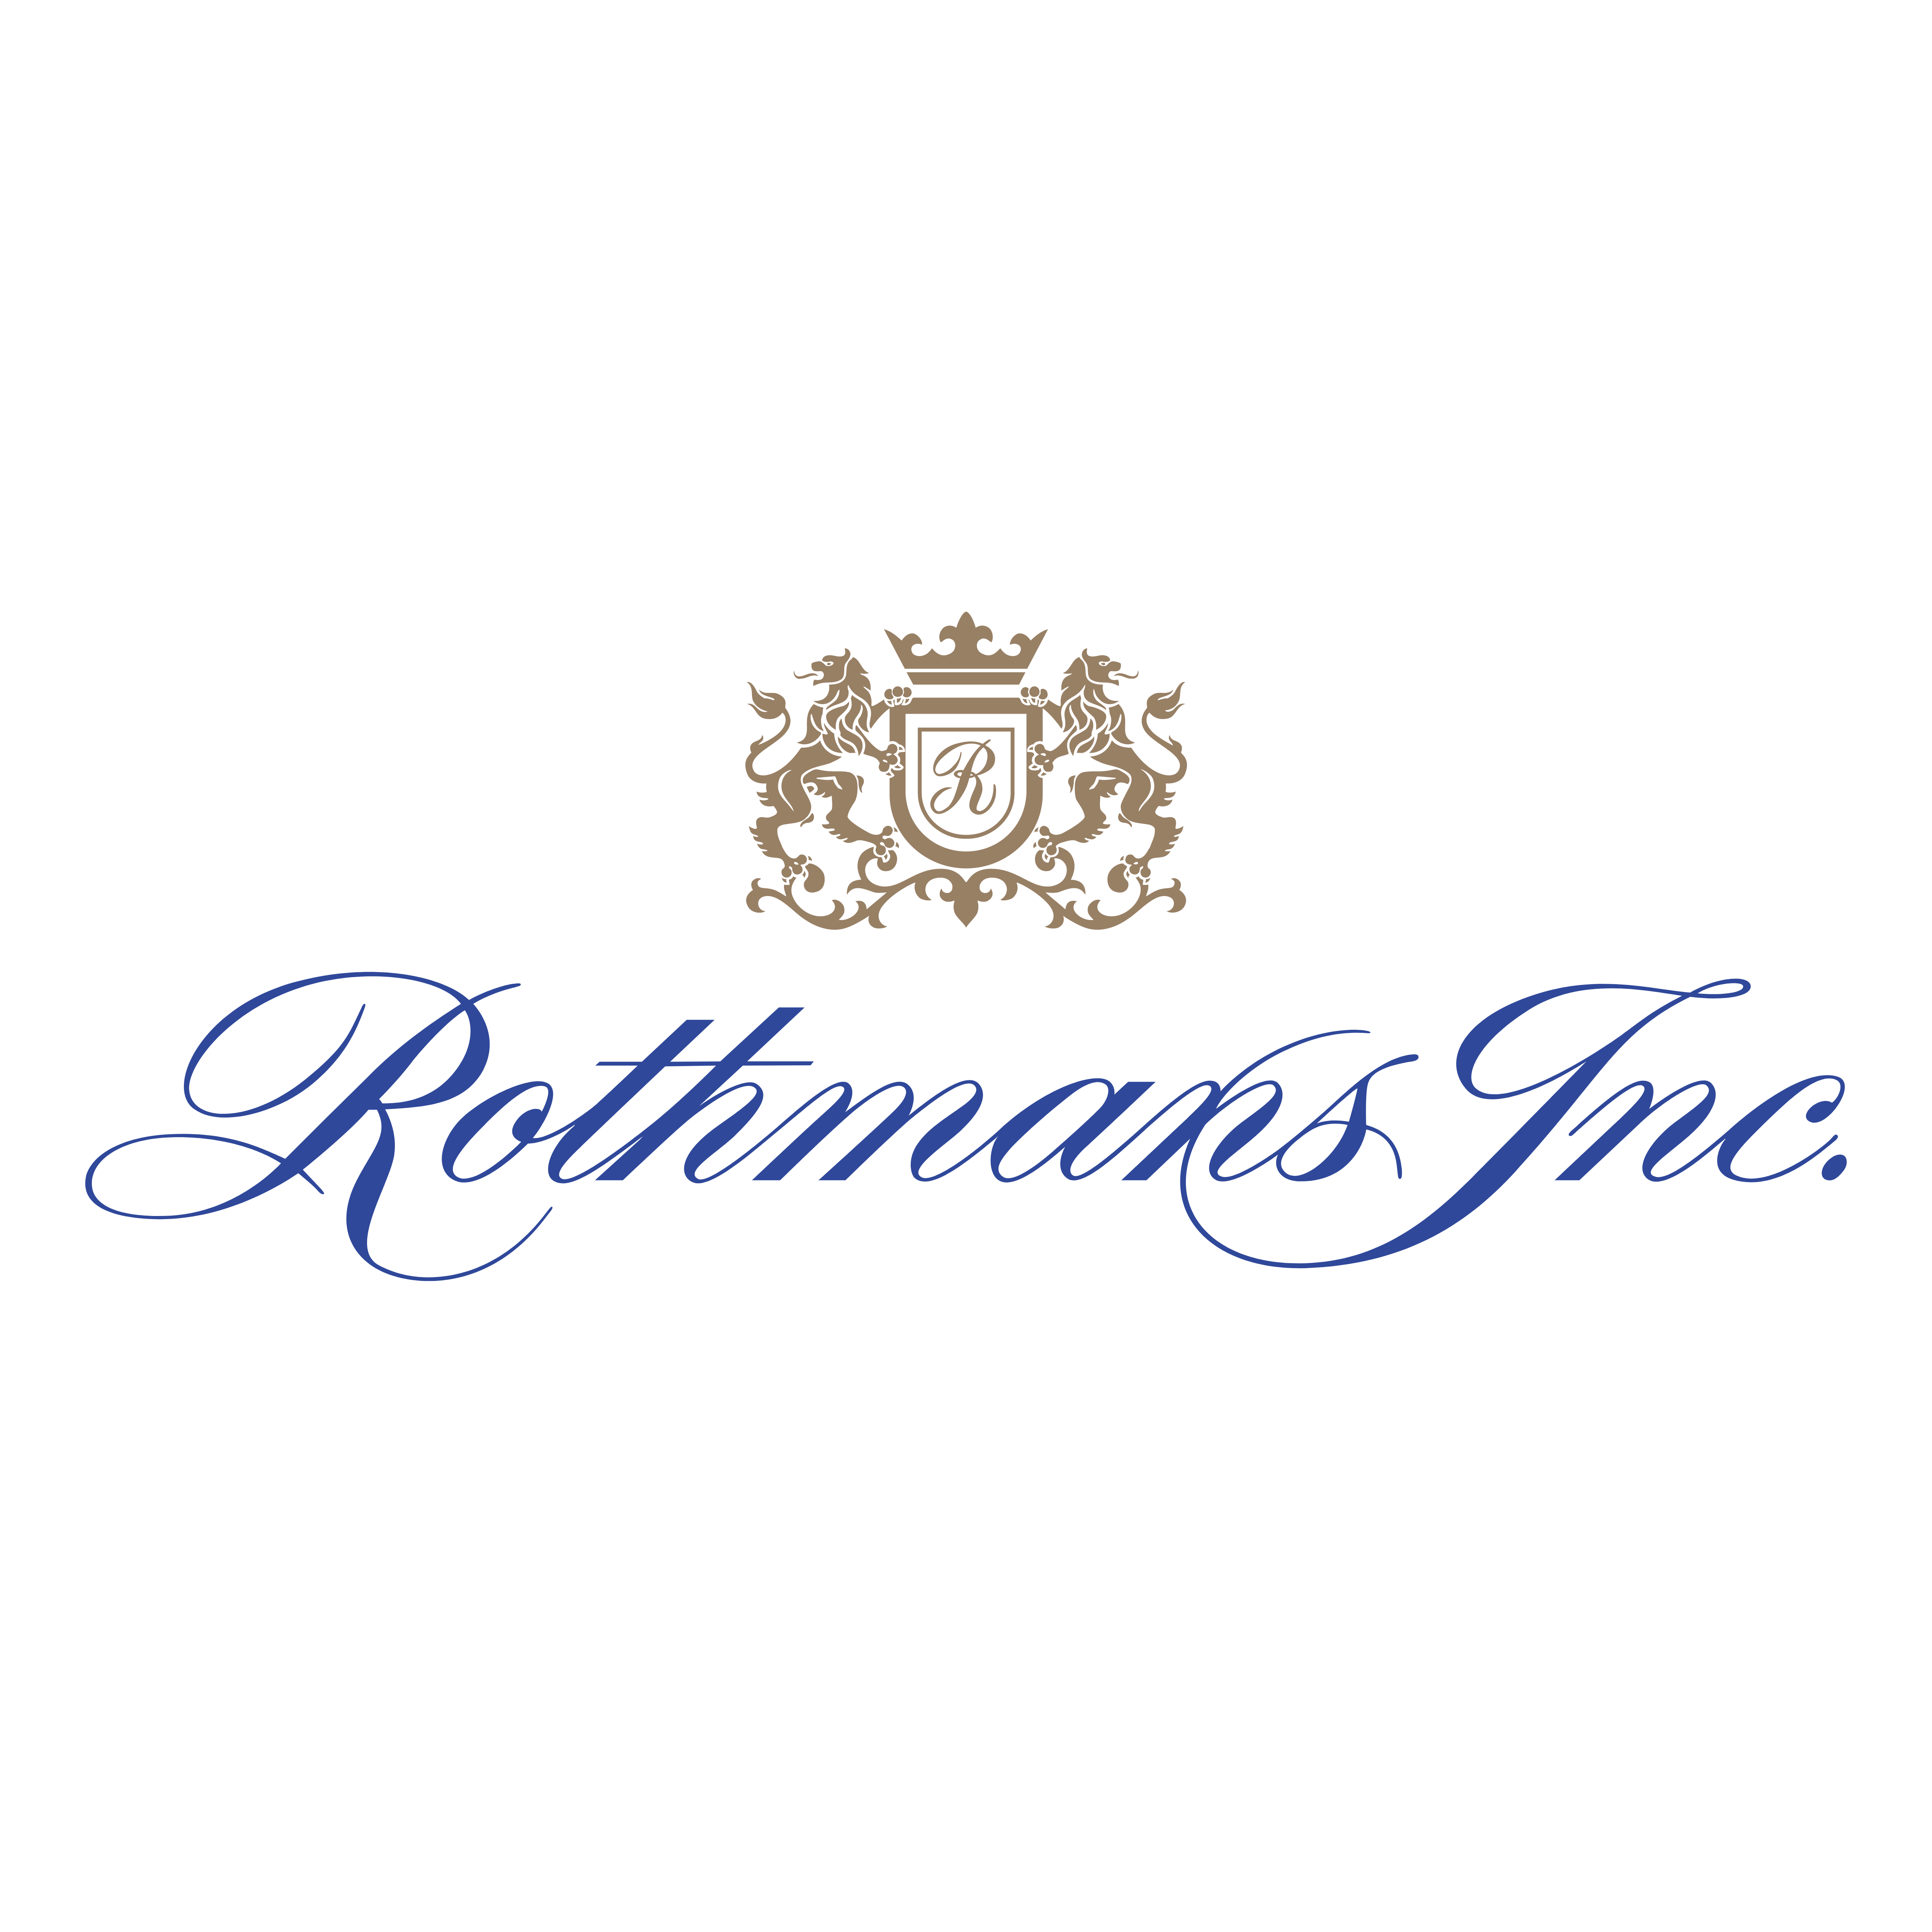 Rothmans – Logos Download - Rothmans, Transparent background PNG HD thumbnail